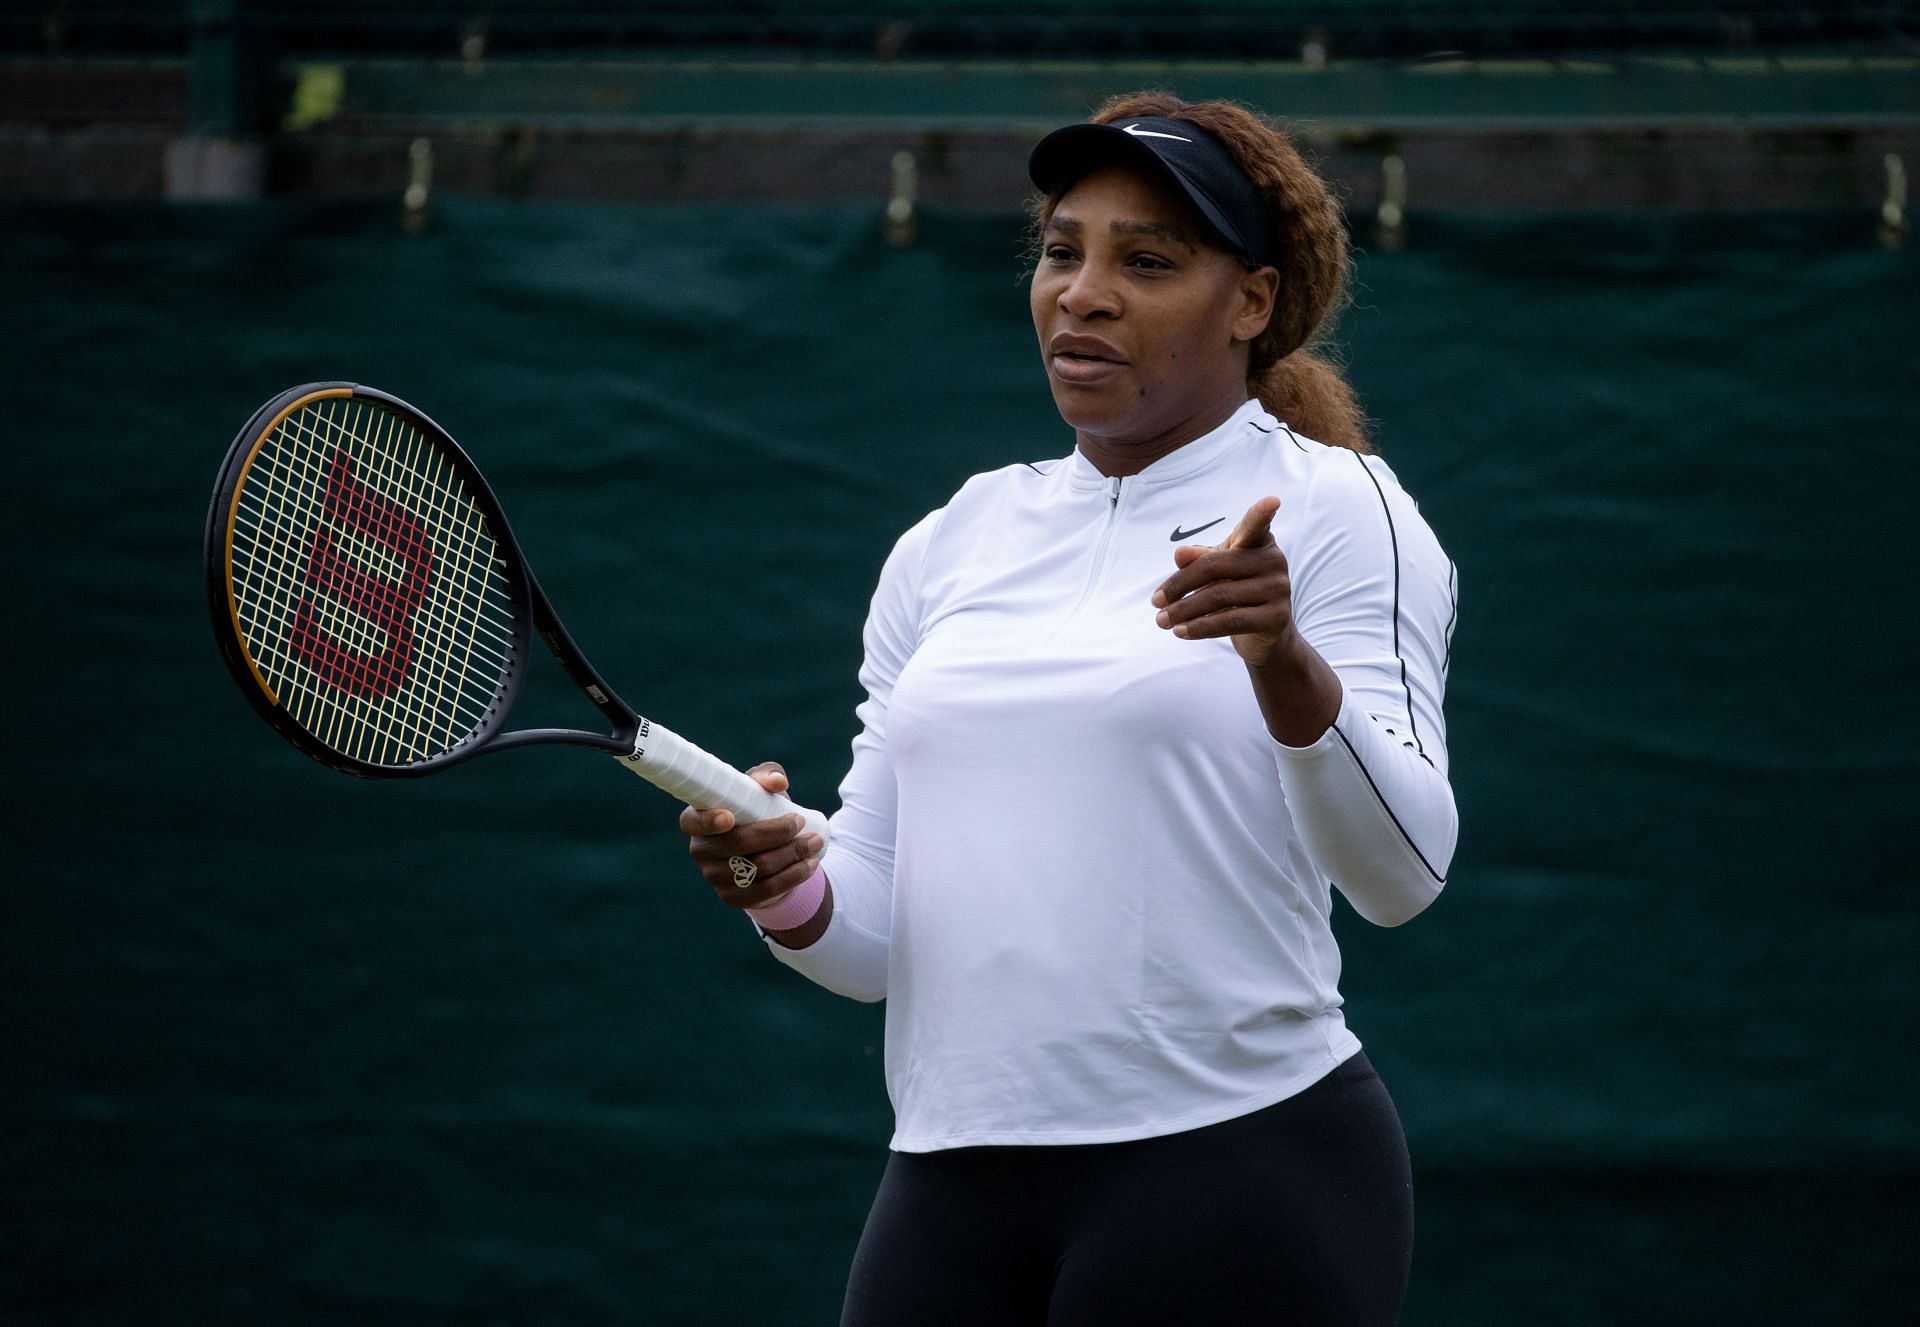 Williams will compete in Wimbledon as a wildcard